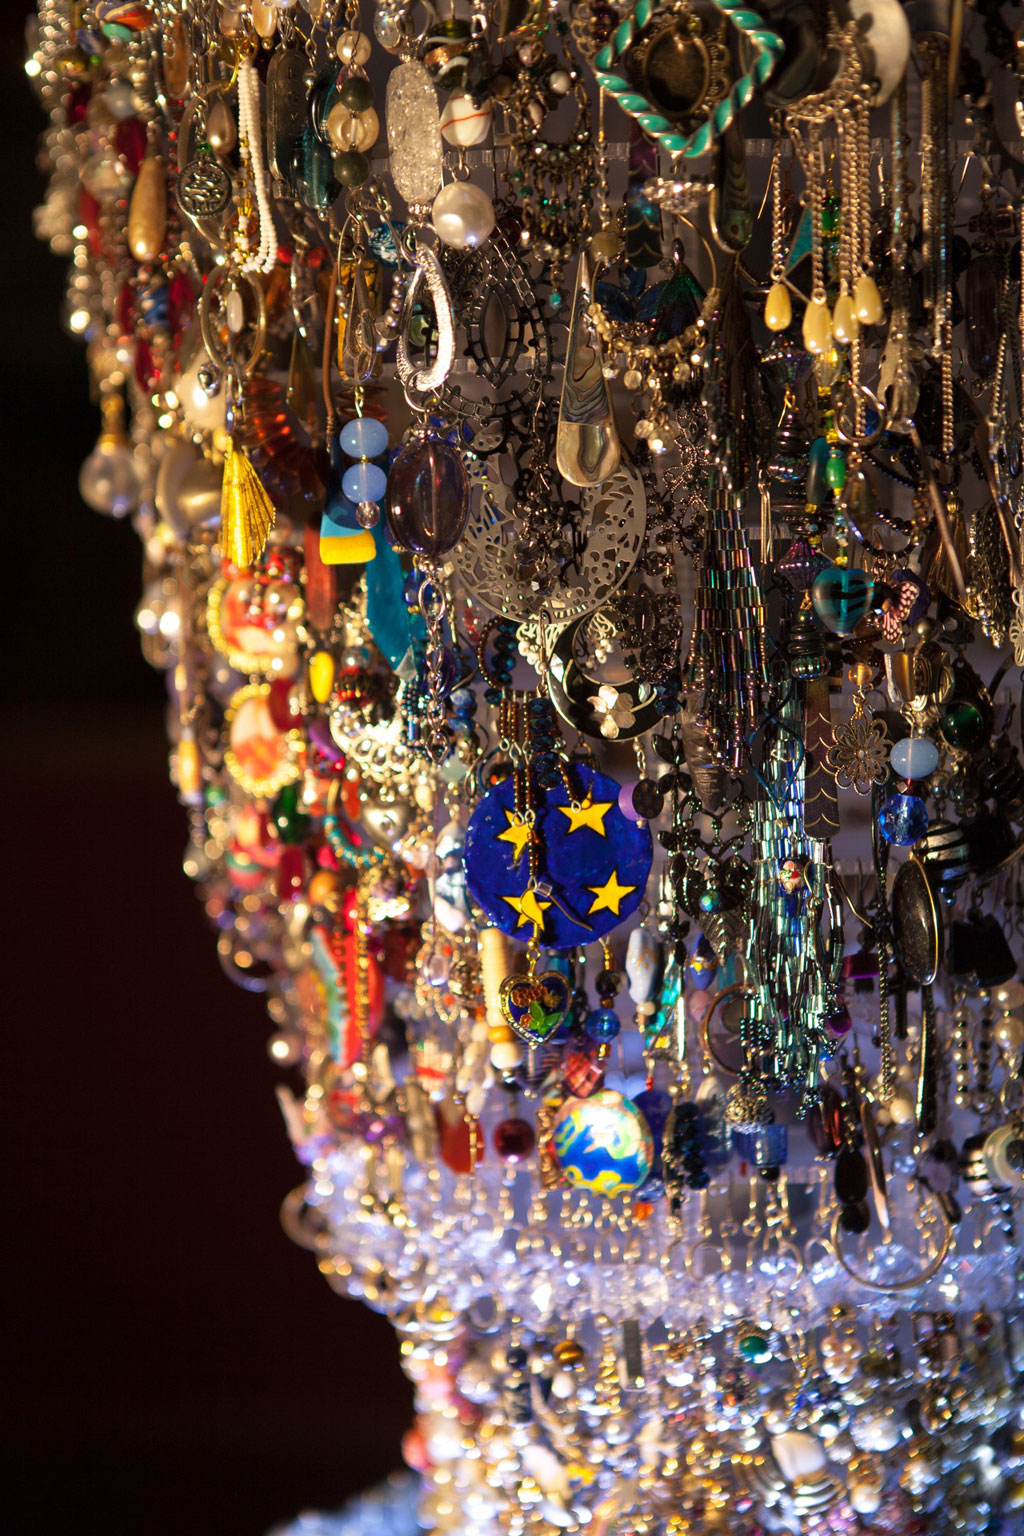 Lauren Sagar and Sharon Campbell, Chandelier of Lost Earrings, 2013. Photography by Geoff Brokate.